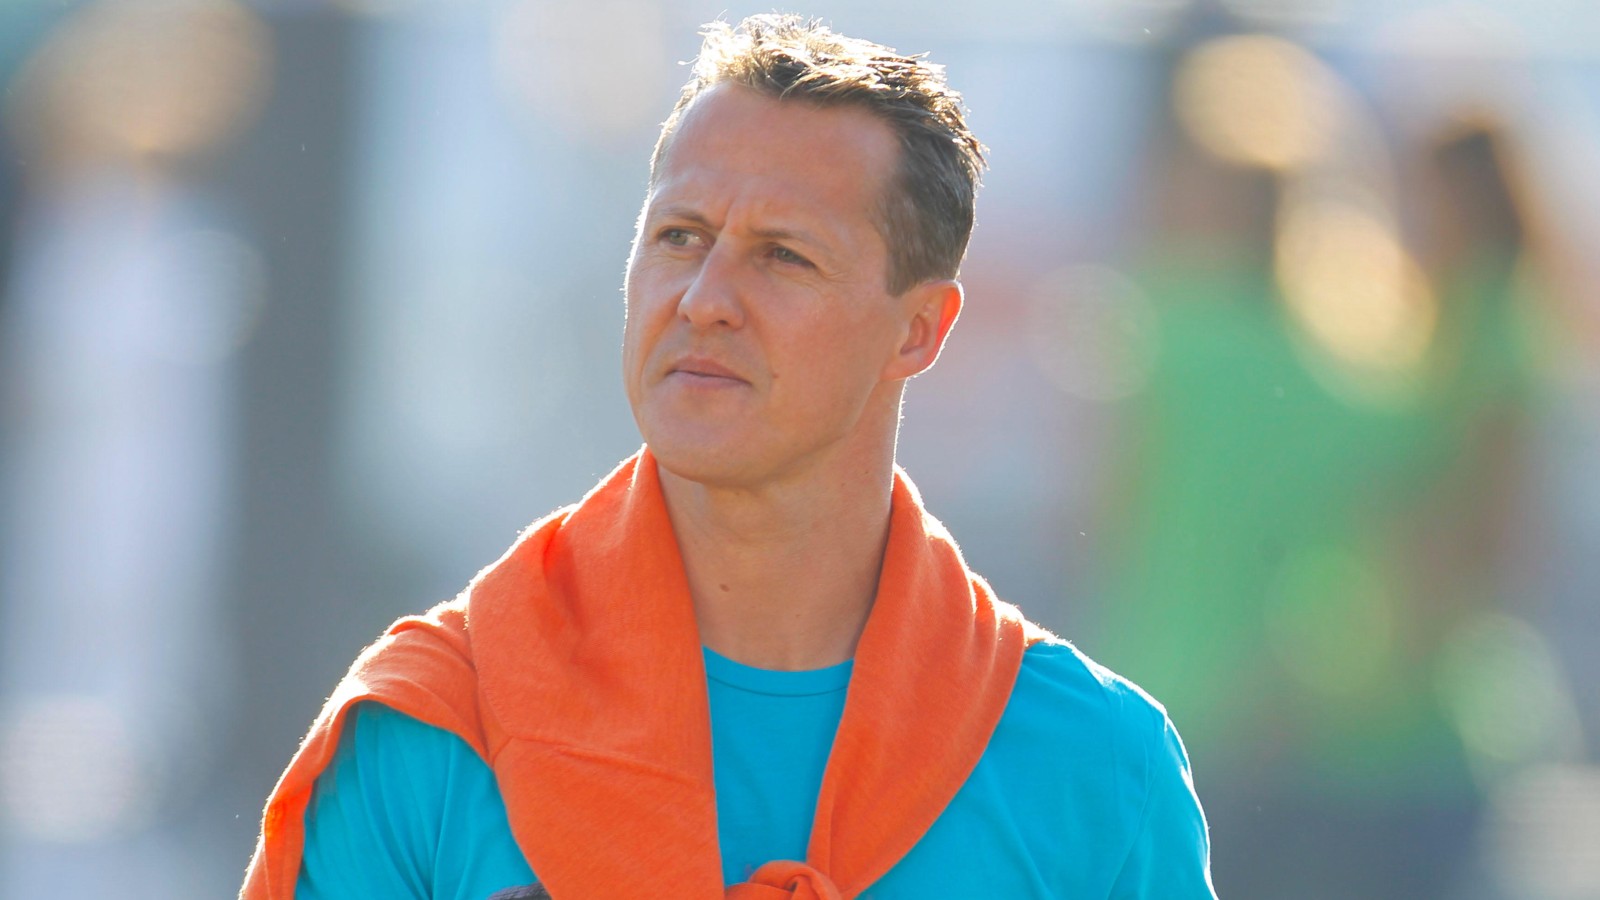 F1 News: Michael Schumacher Documentary Confirmed Emotionally Marking  10-Year Anniversary Of Horrific Accident - F1 Briefings: Formula 1 News,  Rumors, Standings and More